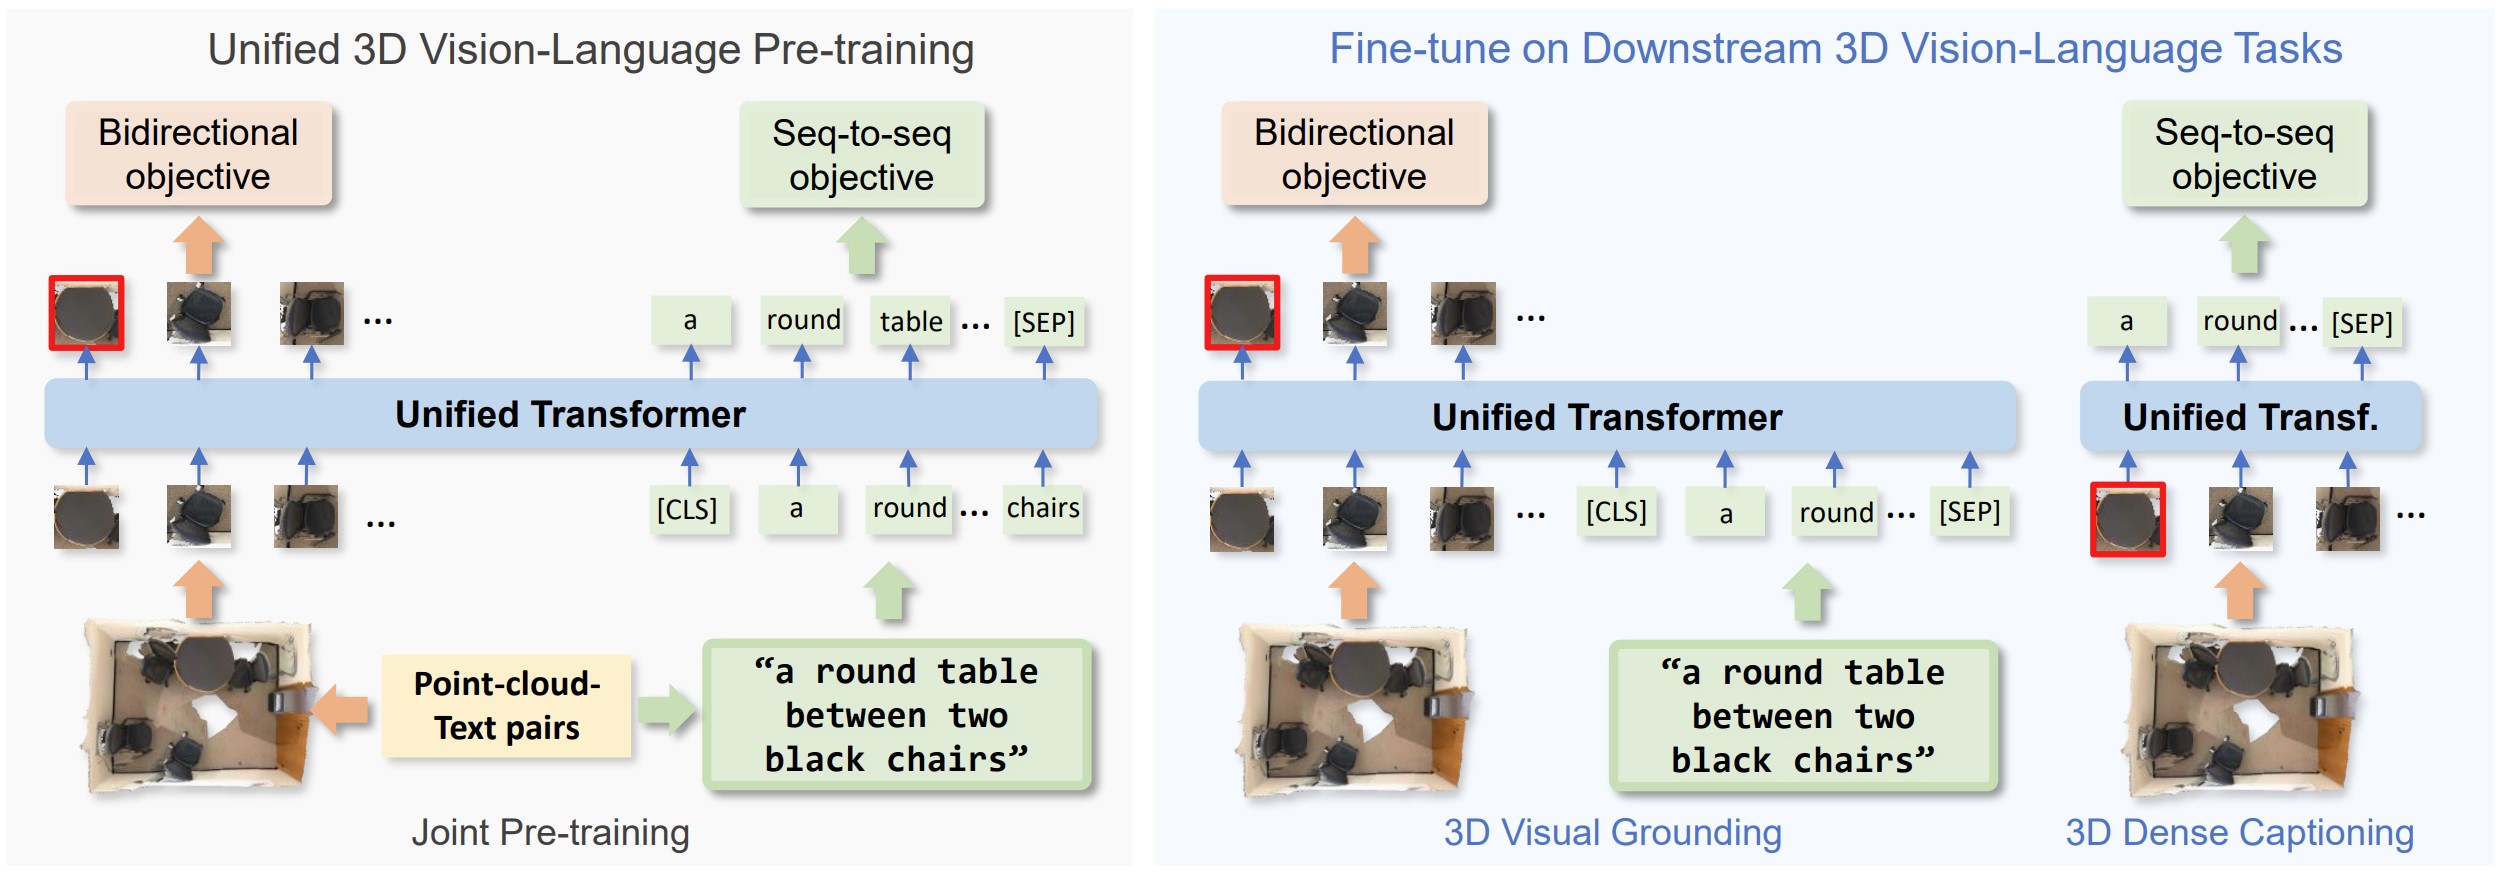 UniT3D: A Unified Transformer for 3D Dense Captioning and Visual Grounding